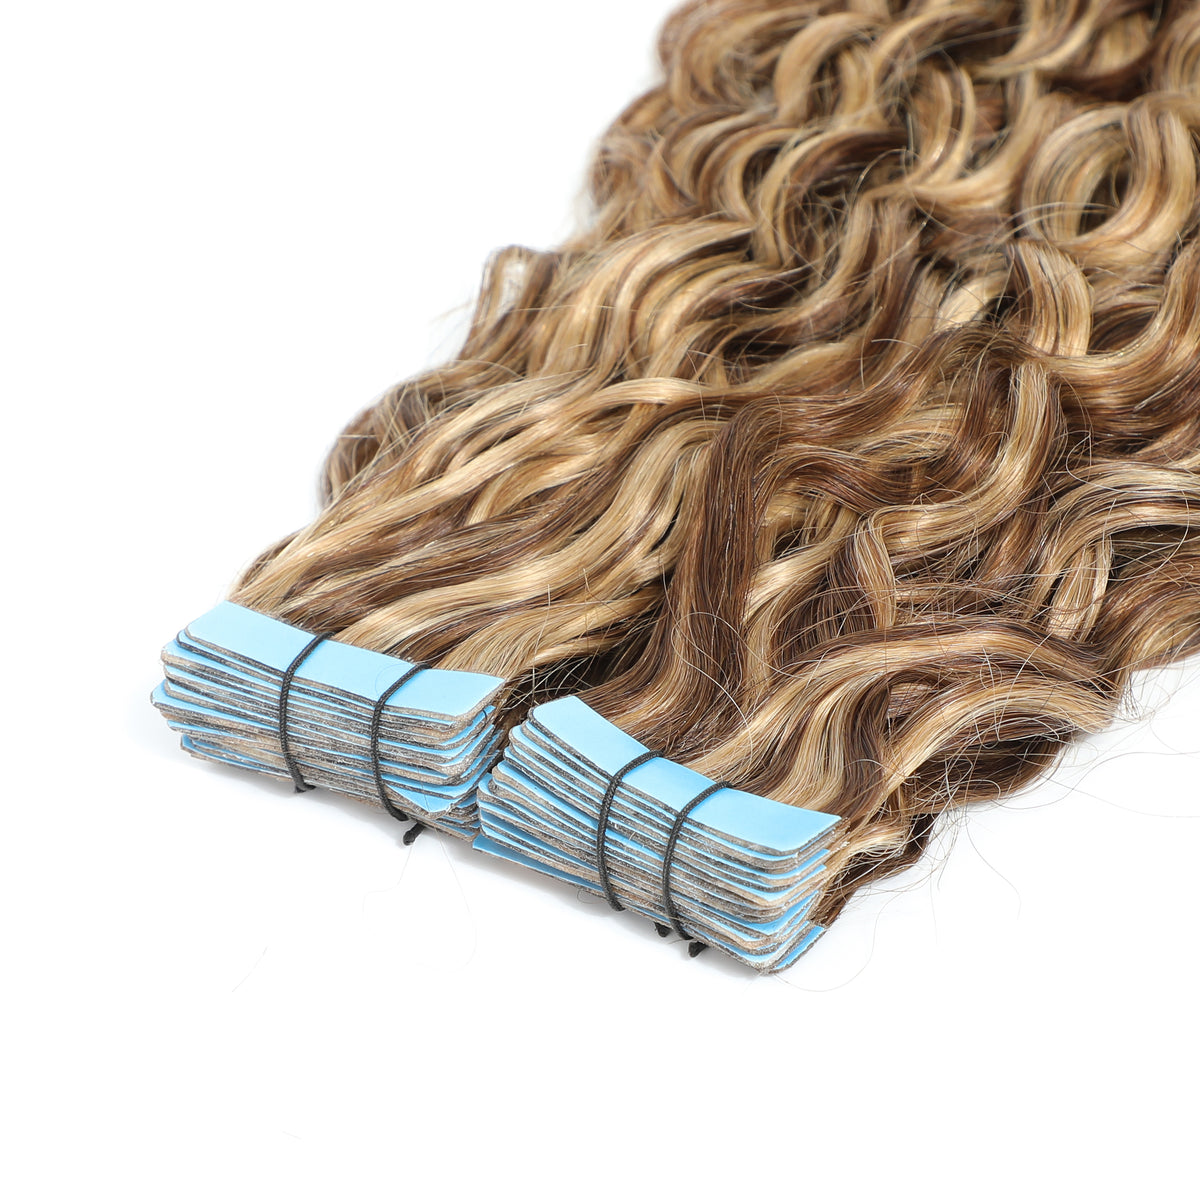 Curly Tape Hair Extensions 3B  #4/27 Chestnut Brown & Bronzed Blonde Highlights